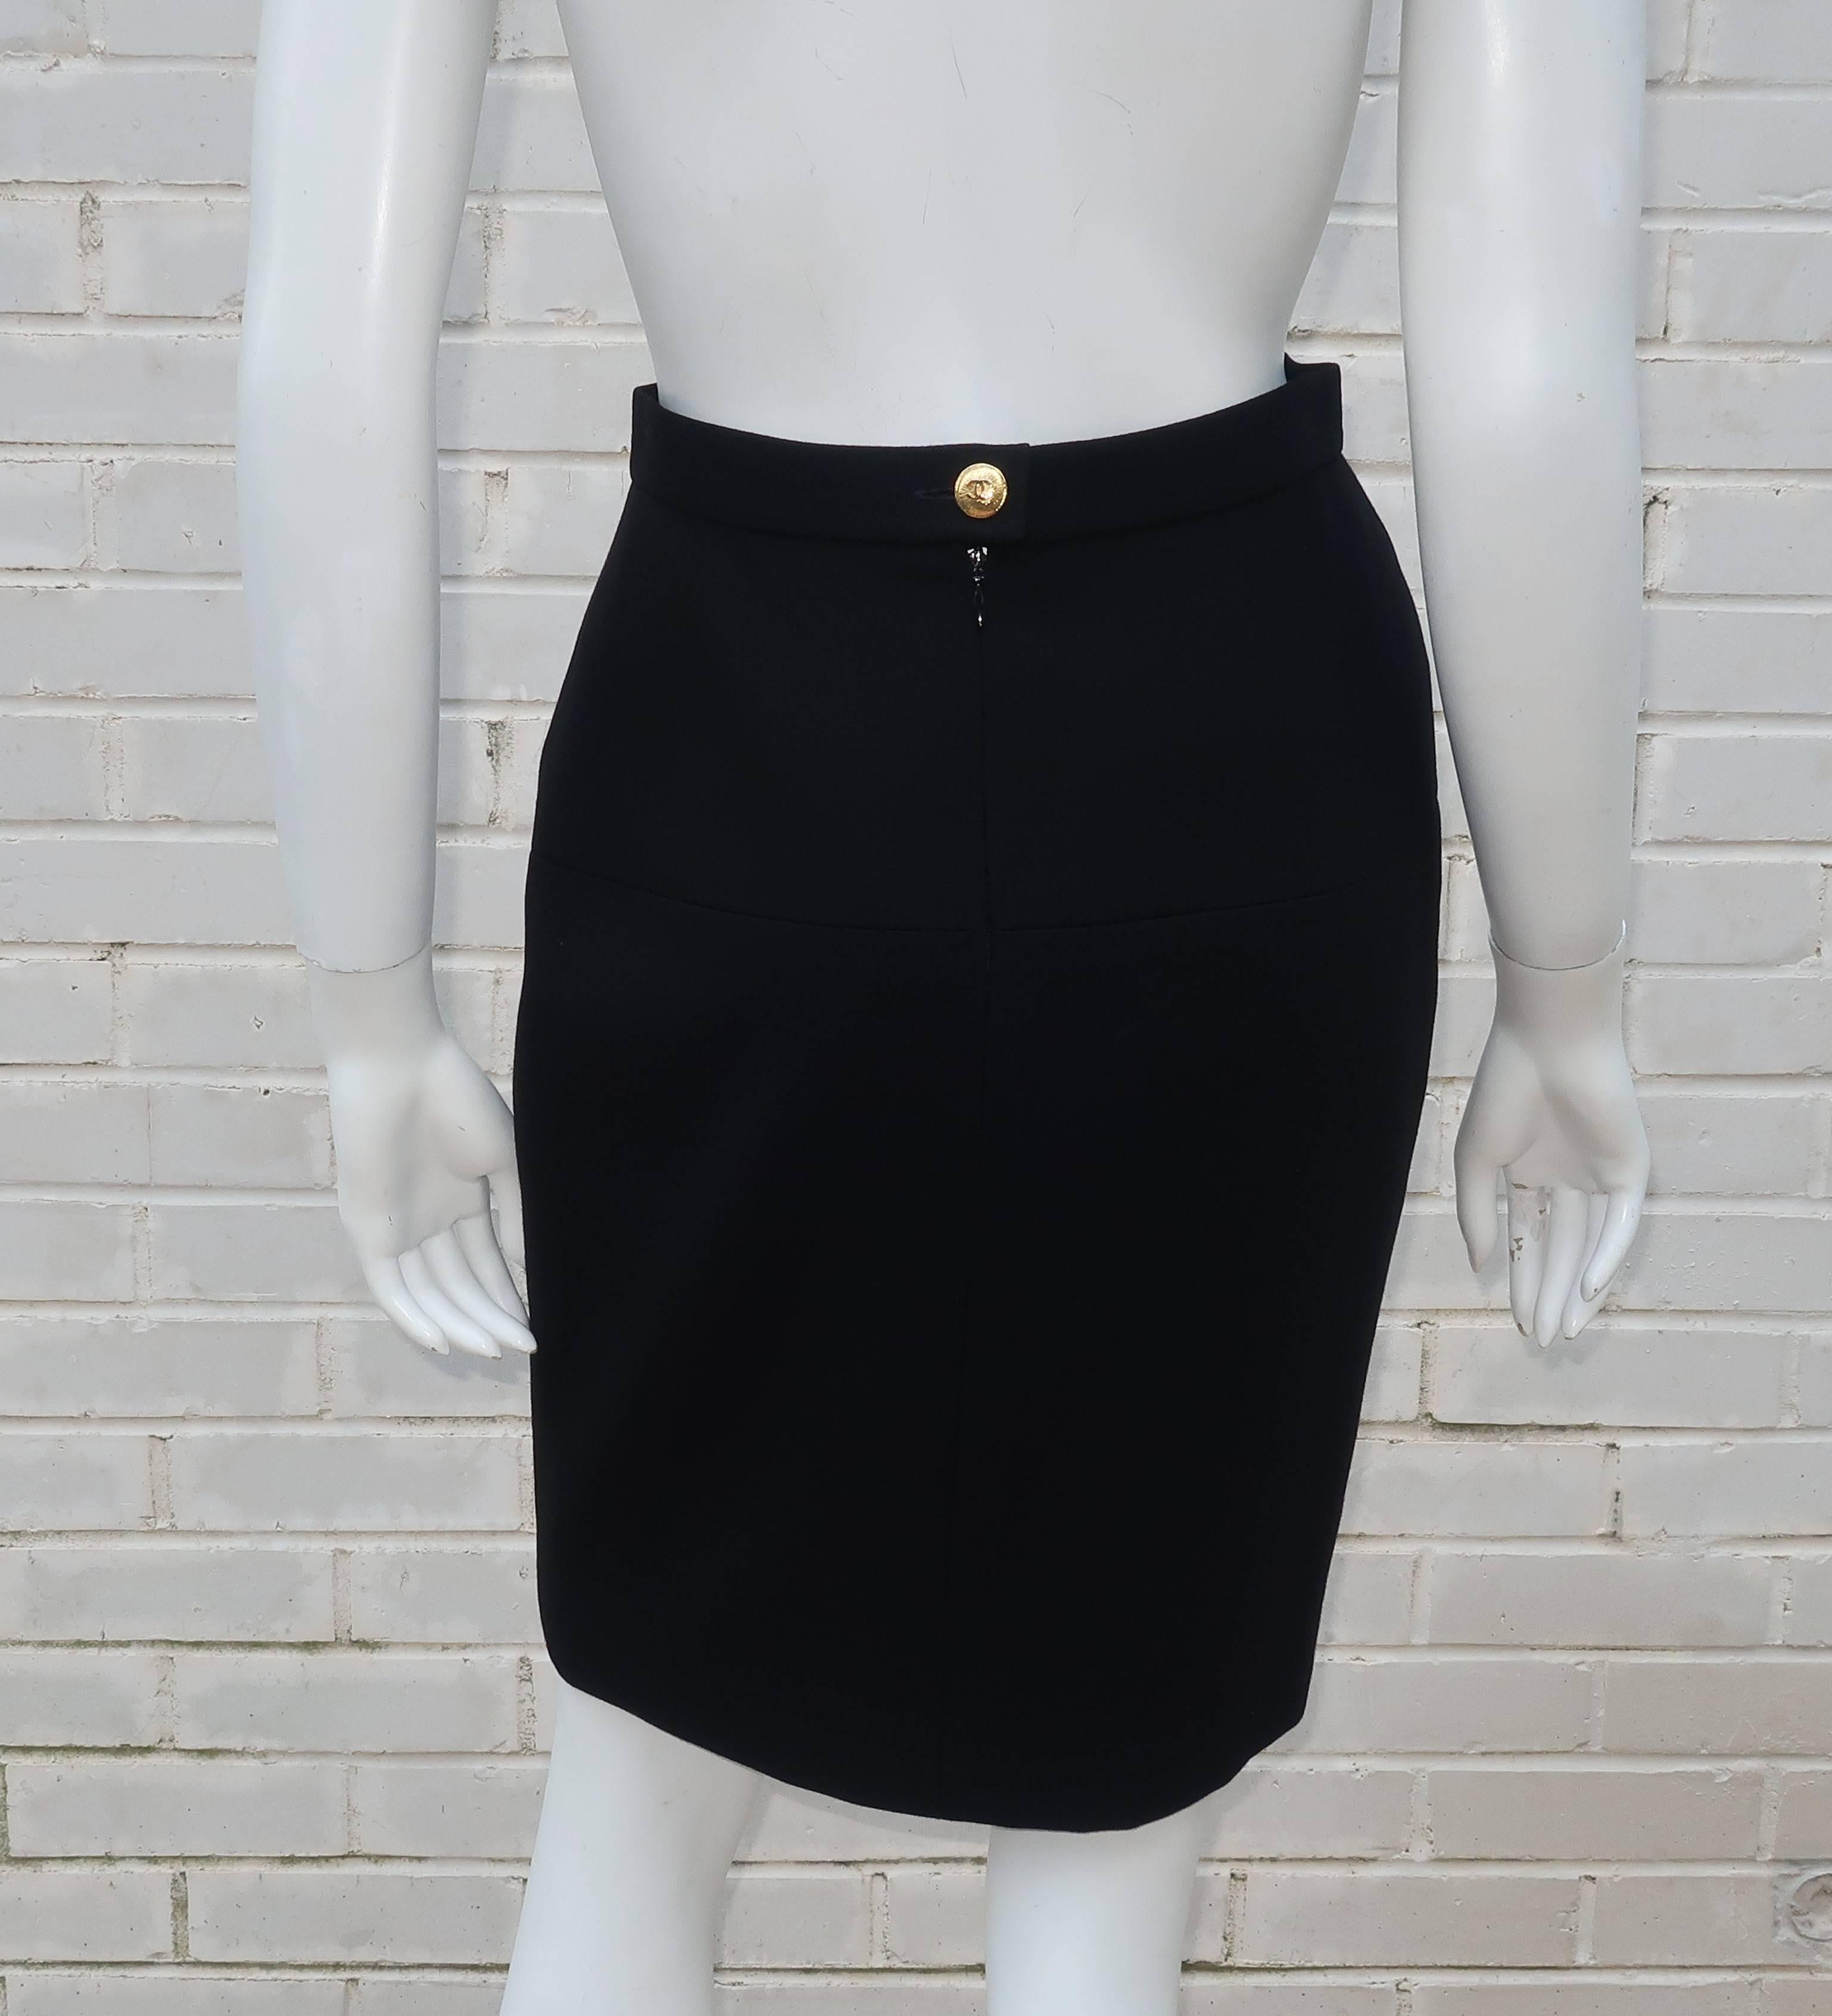 C.1990 Chanel Classic Black Skirt With Gold Logo Button 2